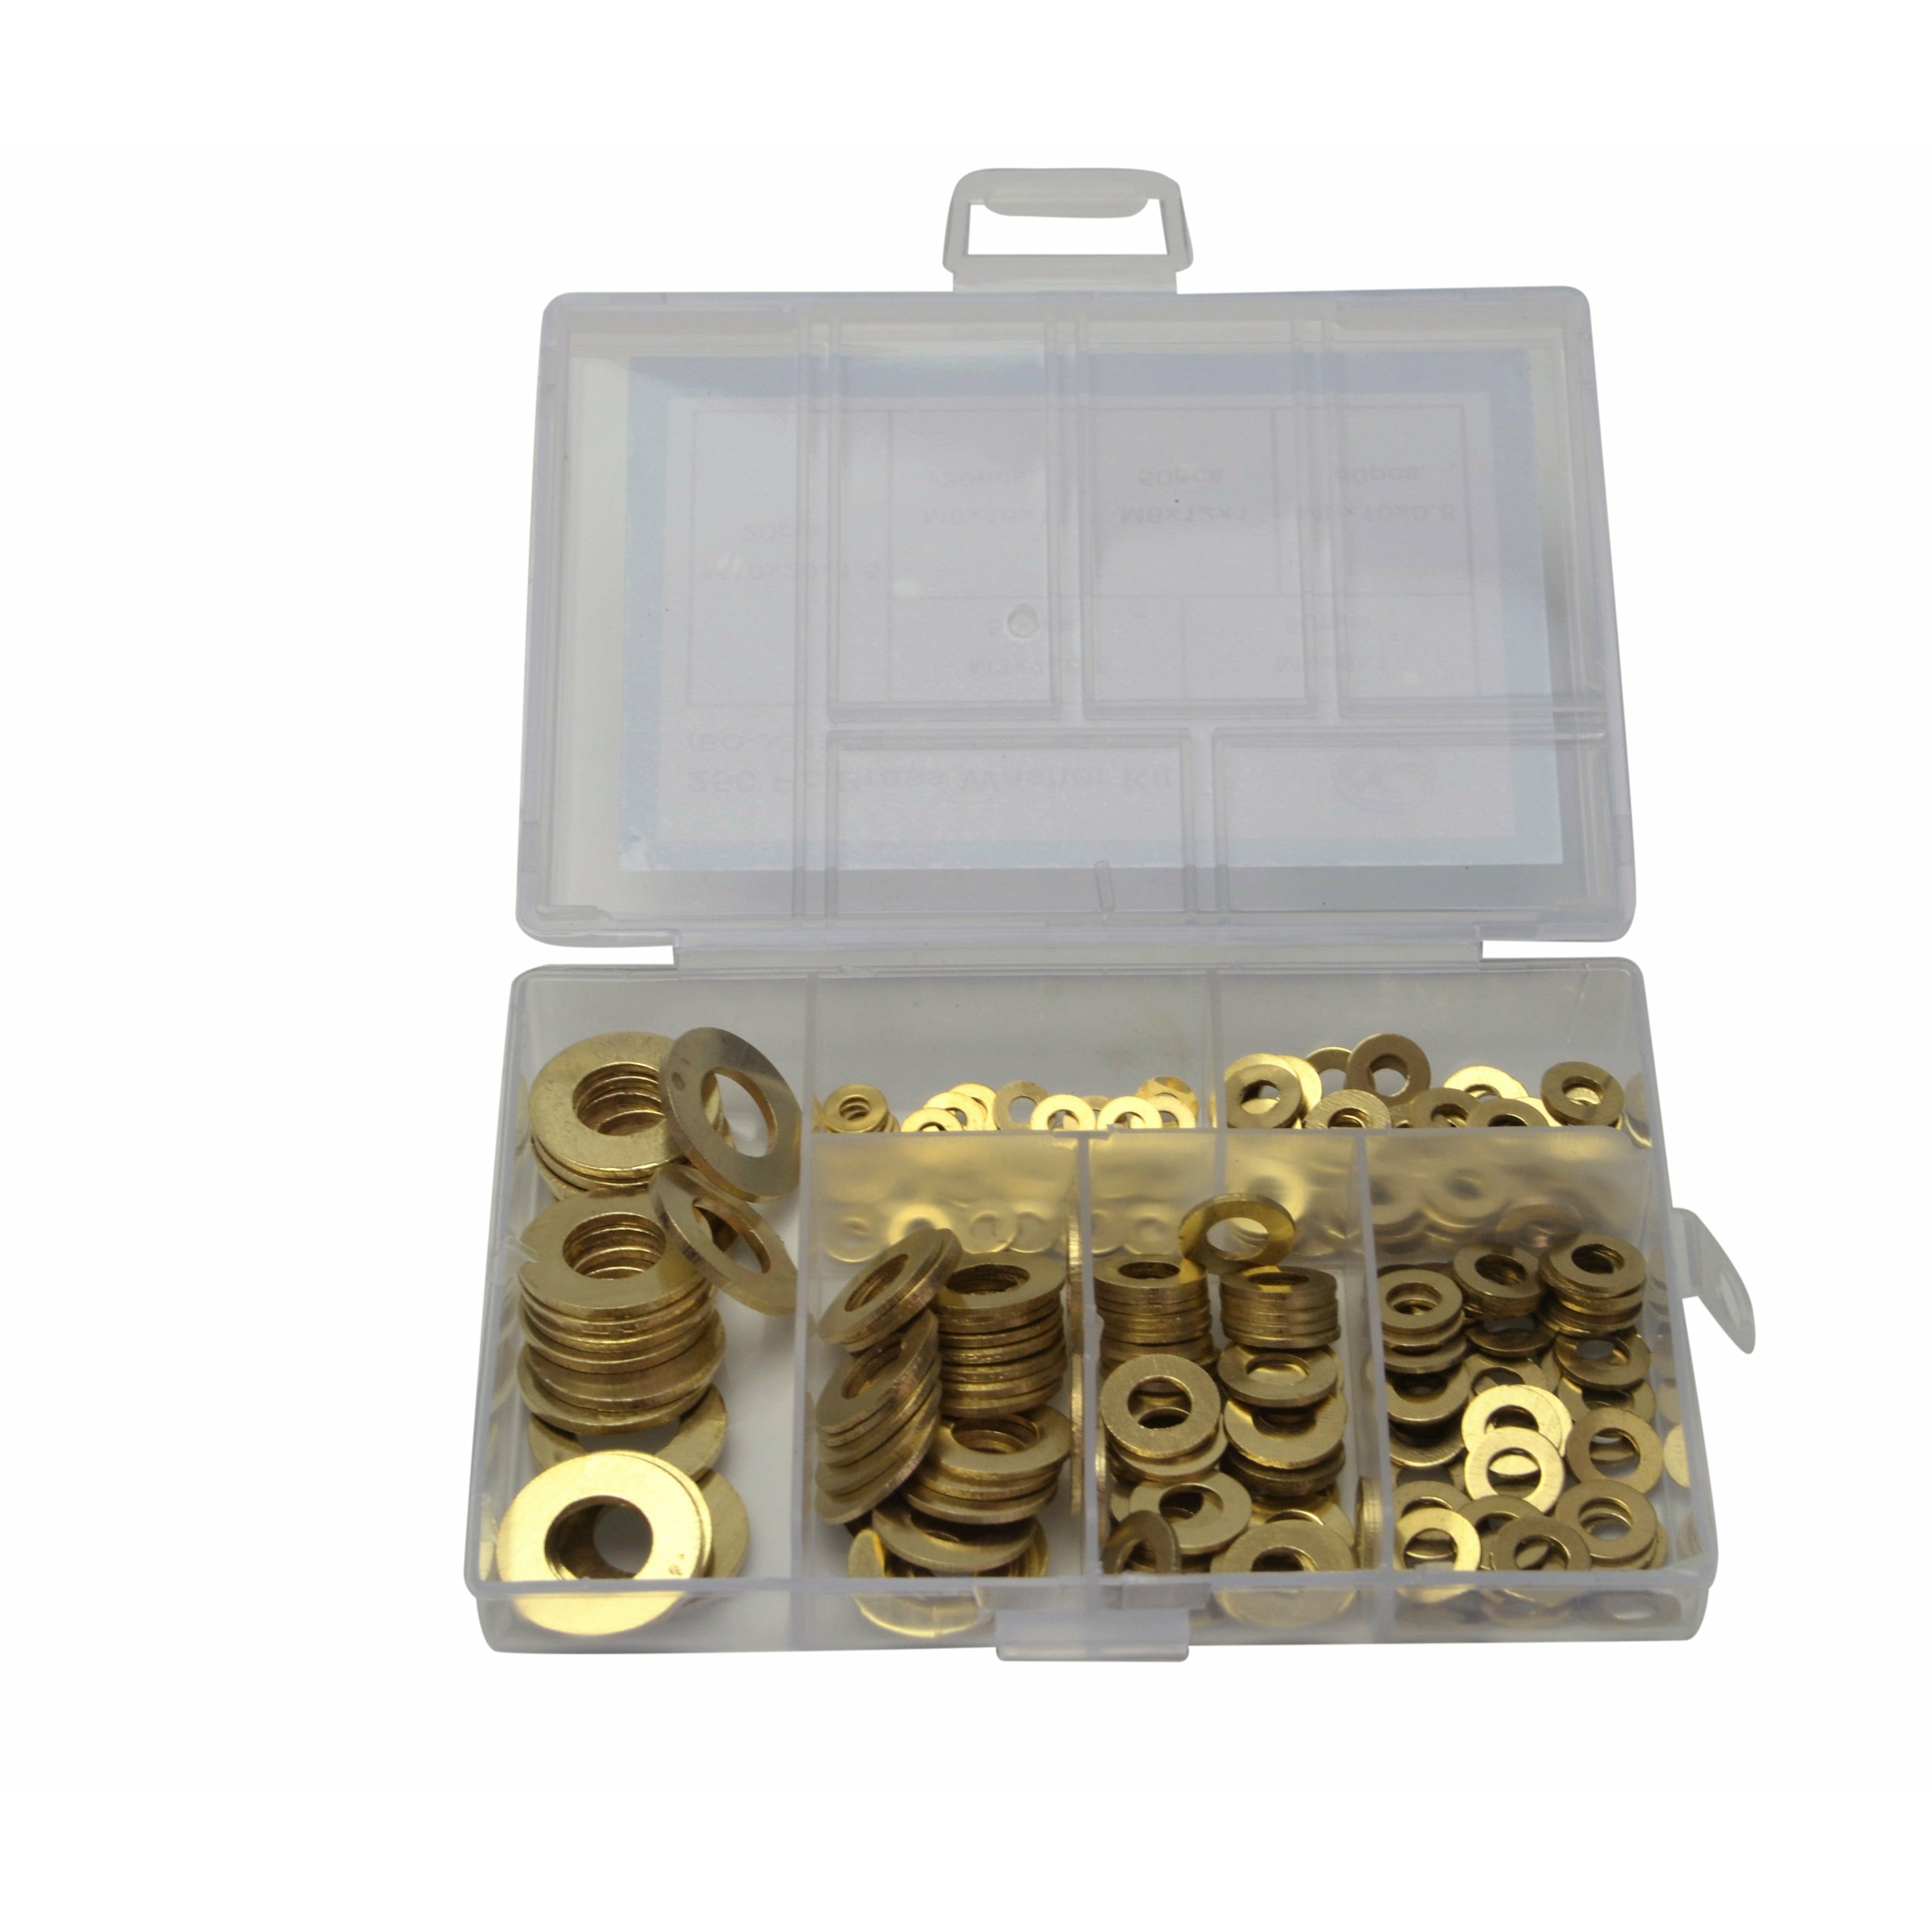 brass washer kit M2 M4 M5 M6 M8 M10 metric assortment 250piece pc fastners industrial hardware supplies